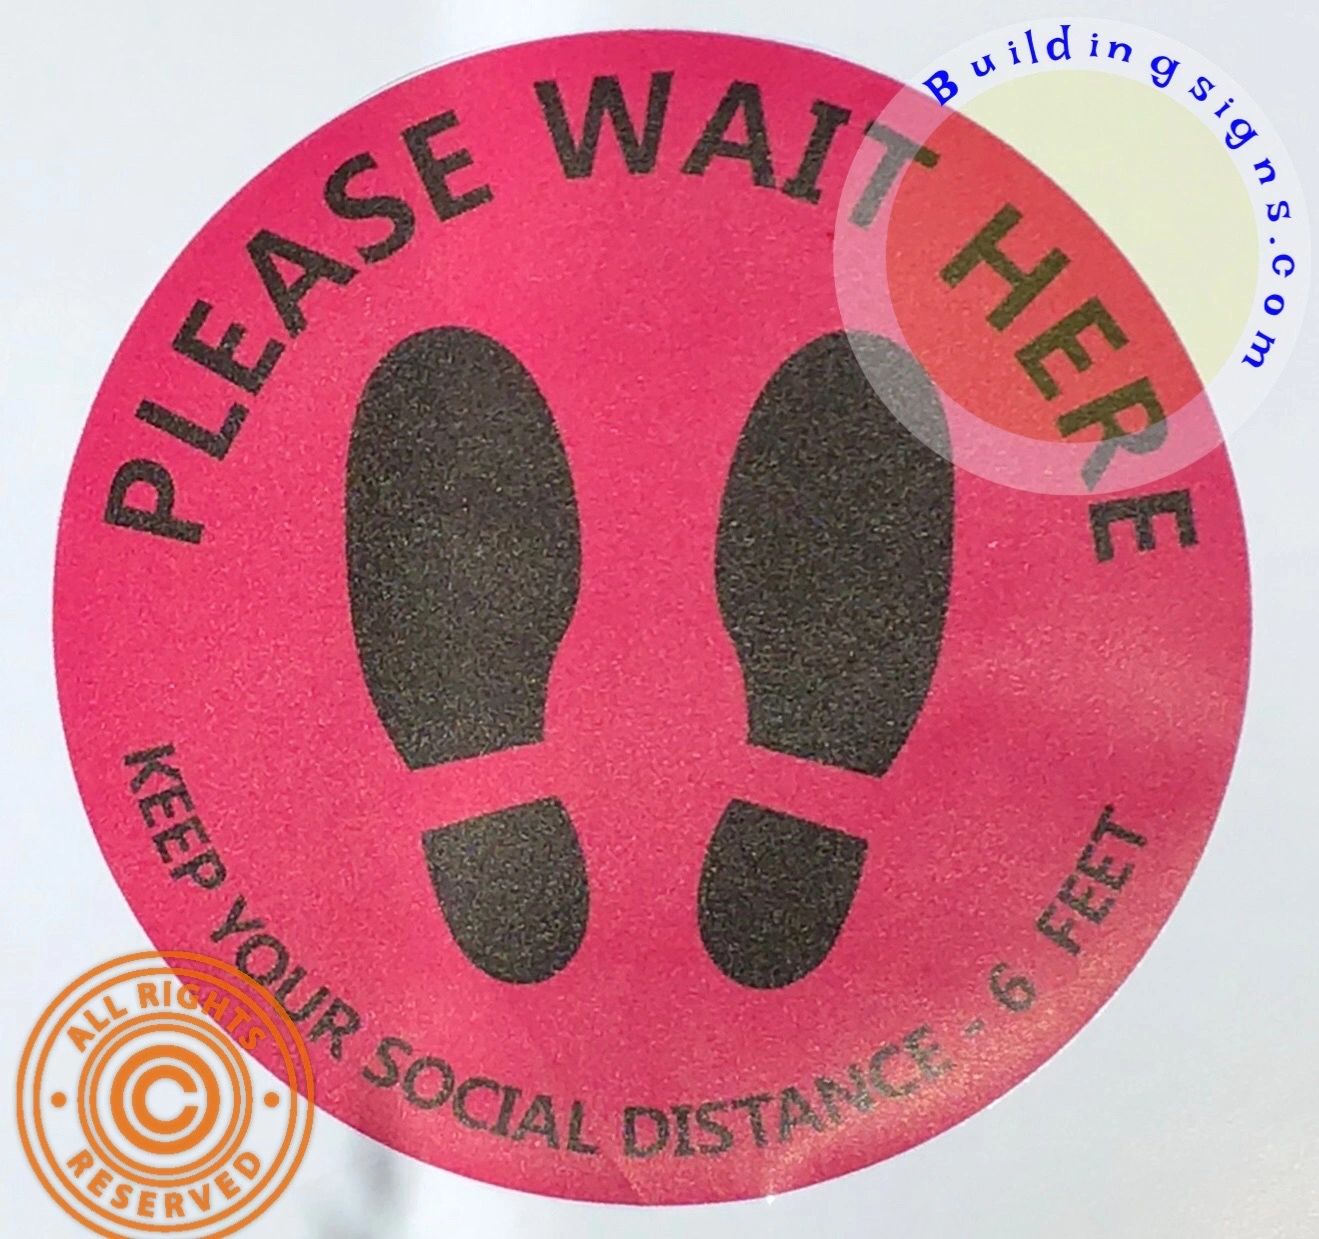 QUEUE SOCIAL DISTANCING SIGN | HPD SIGNS - THE OFFICIAL STORE